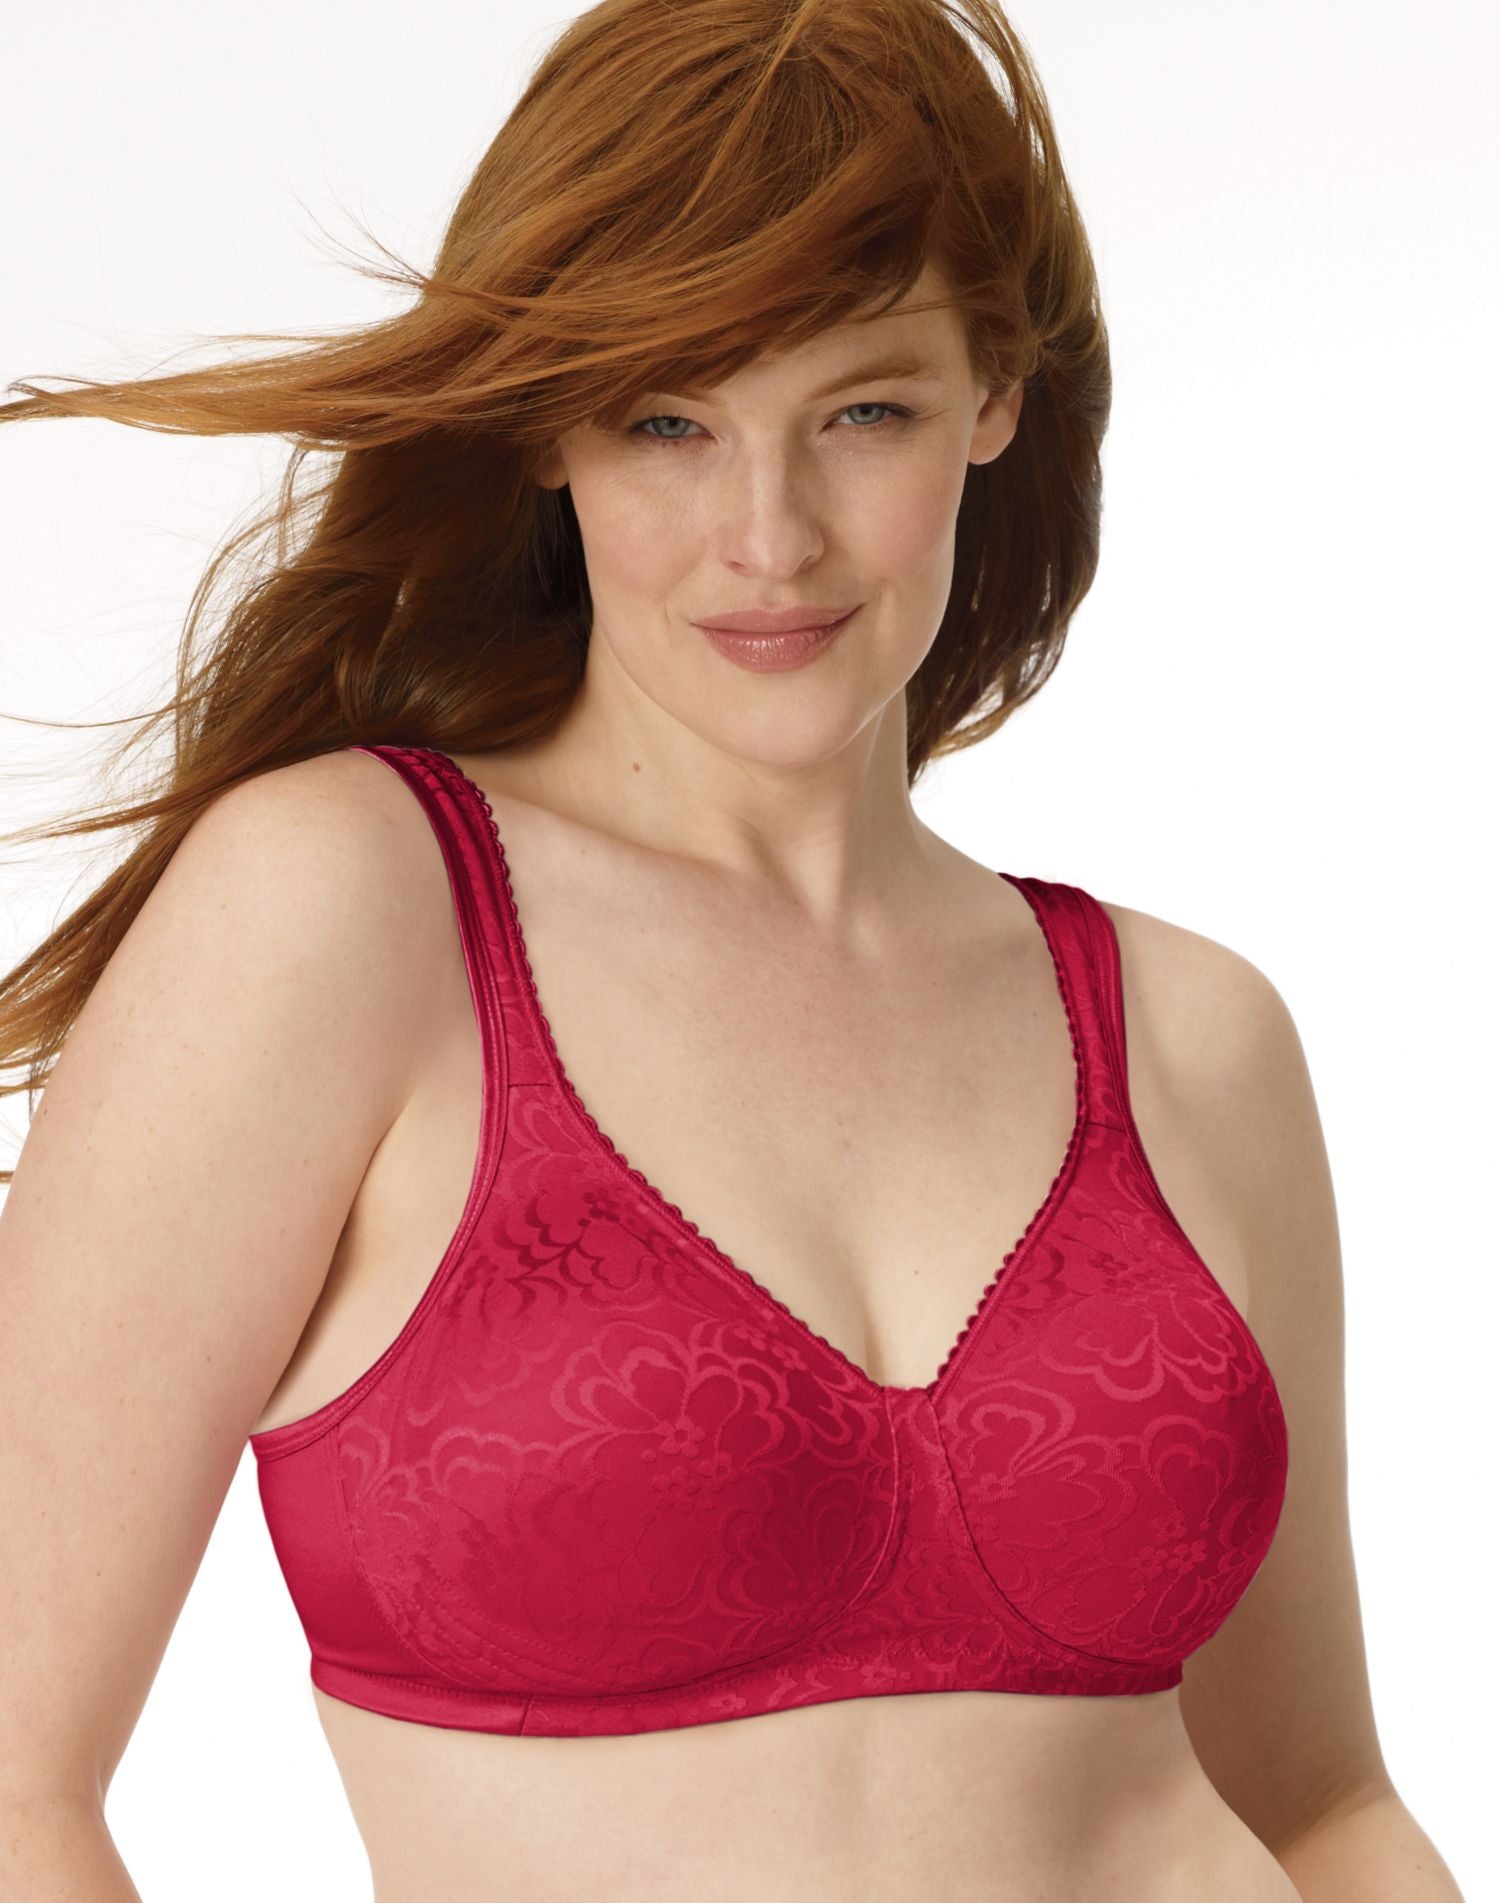 Playtex 18 Hour Ultimate Lift and Support Wireless Bra 4745 - Macy's